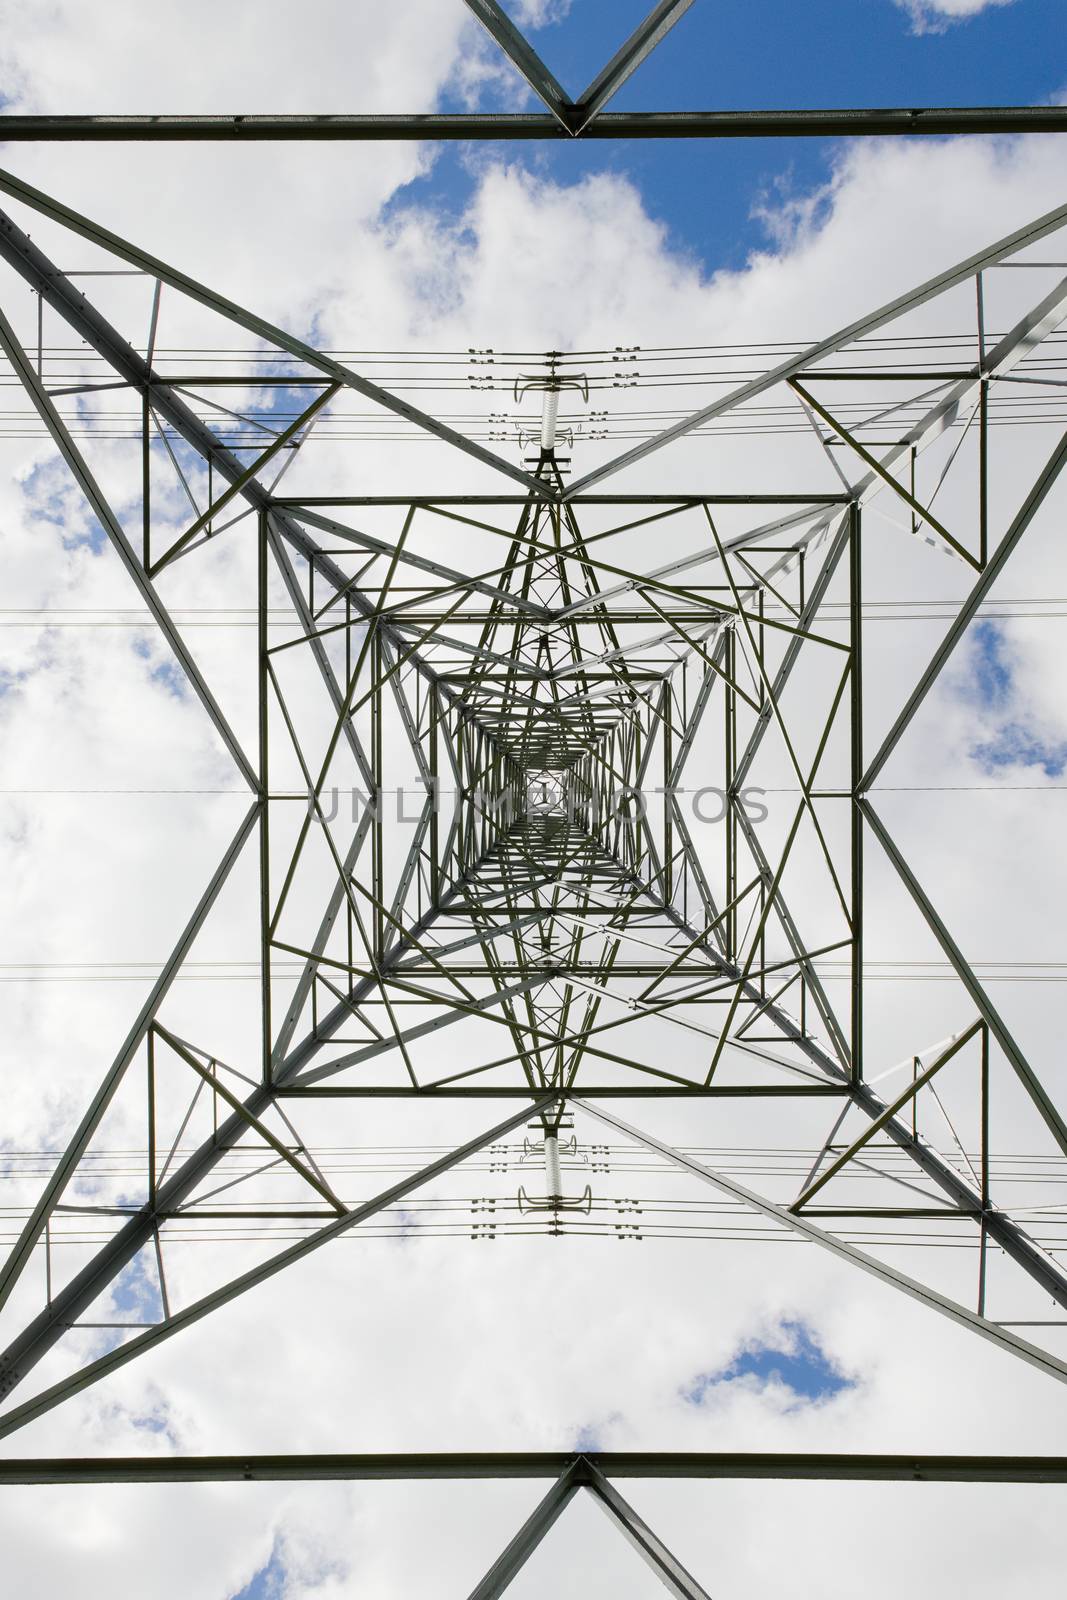 Converging symmetrical patterns created by the metal sheet lattice work that makes up an electrical transmission pylon tower. Blue cloudy sky behind